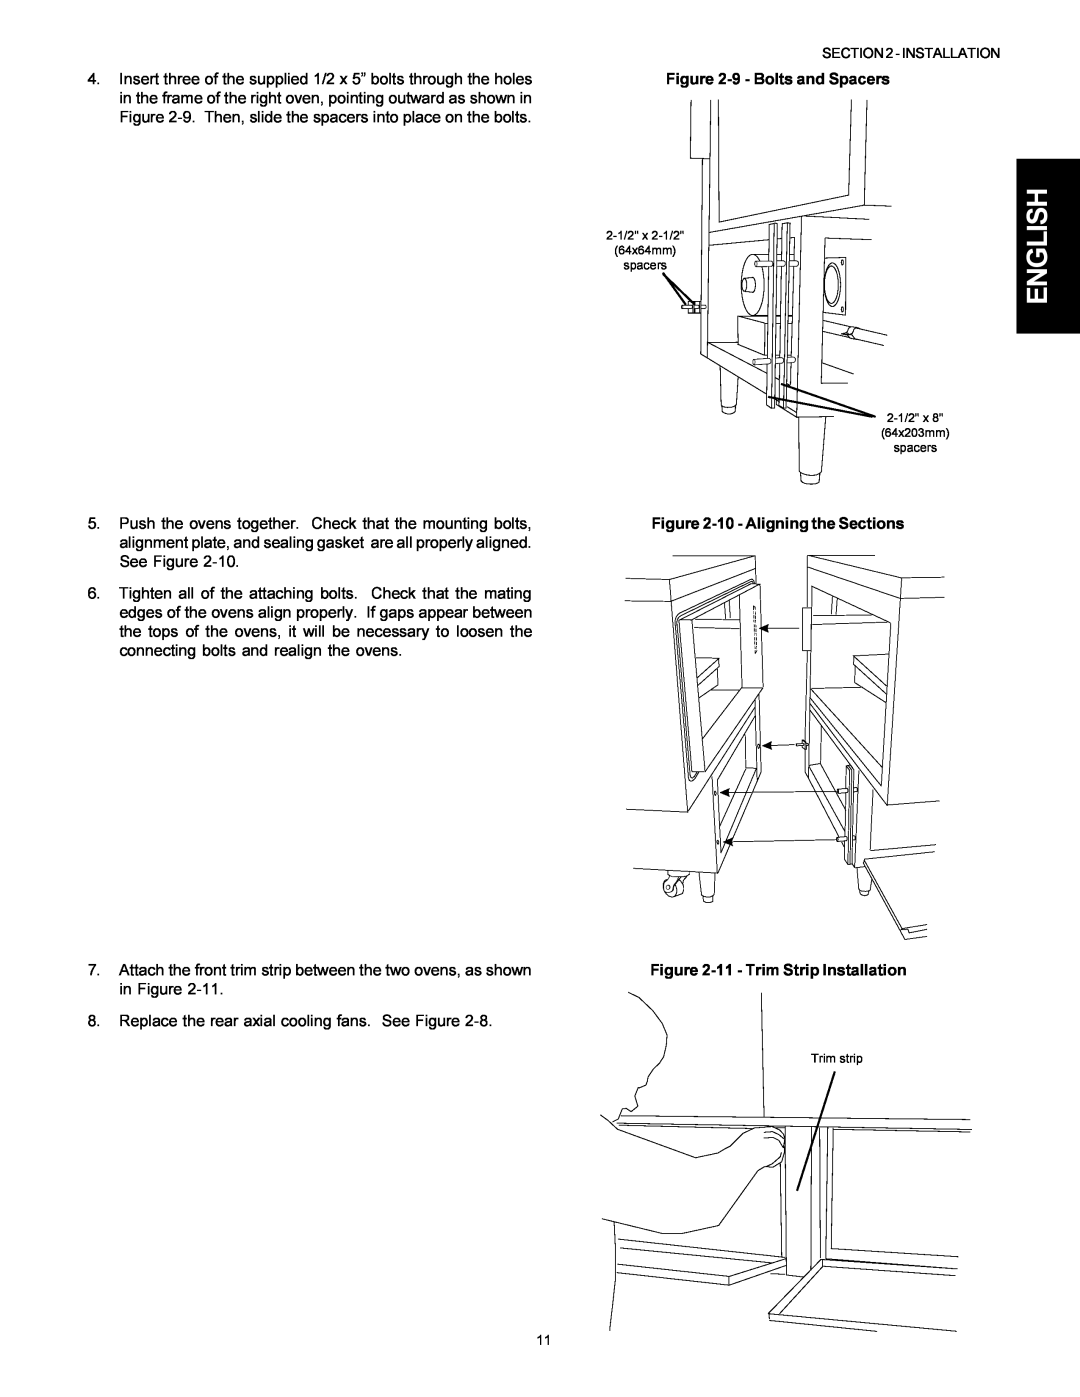 Middleby Marshall PS300F installation manual English, 9- Bolts and Spacers, 11- Trim Strip Installation 